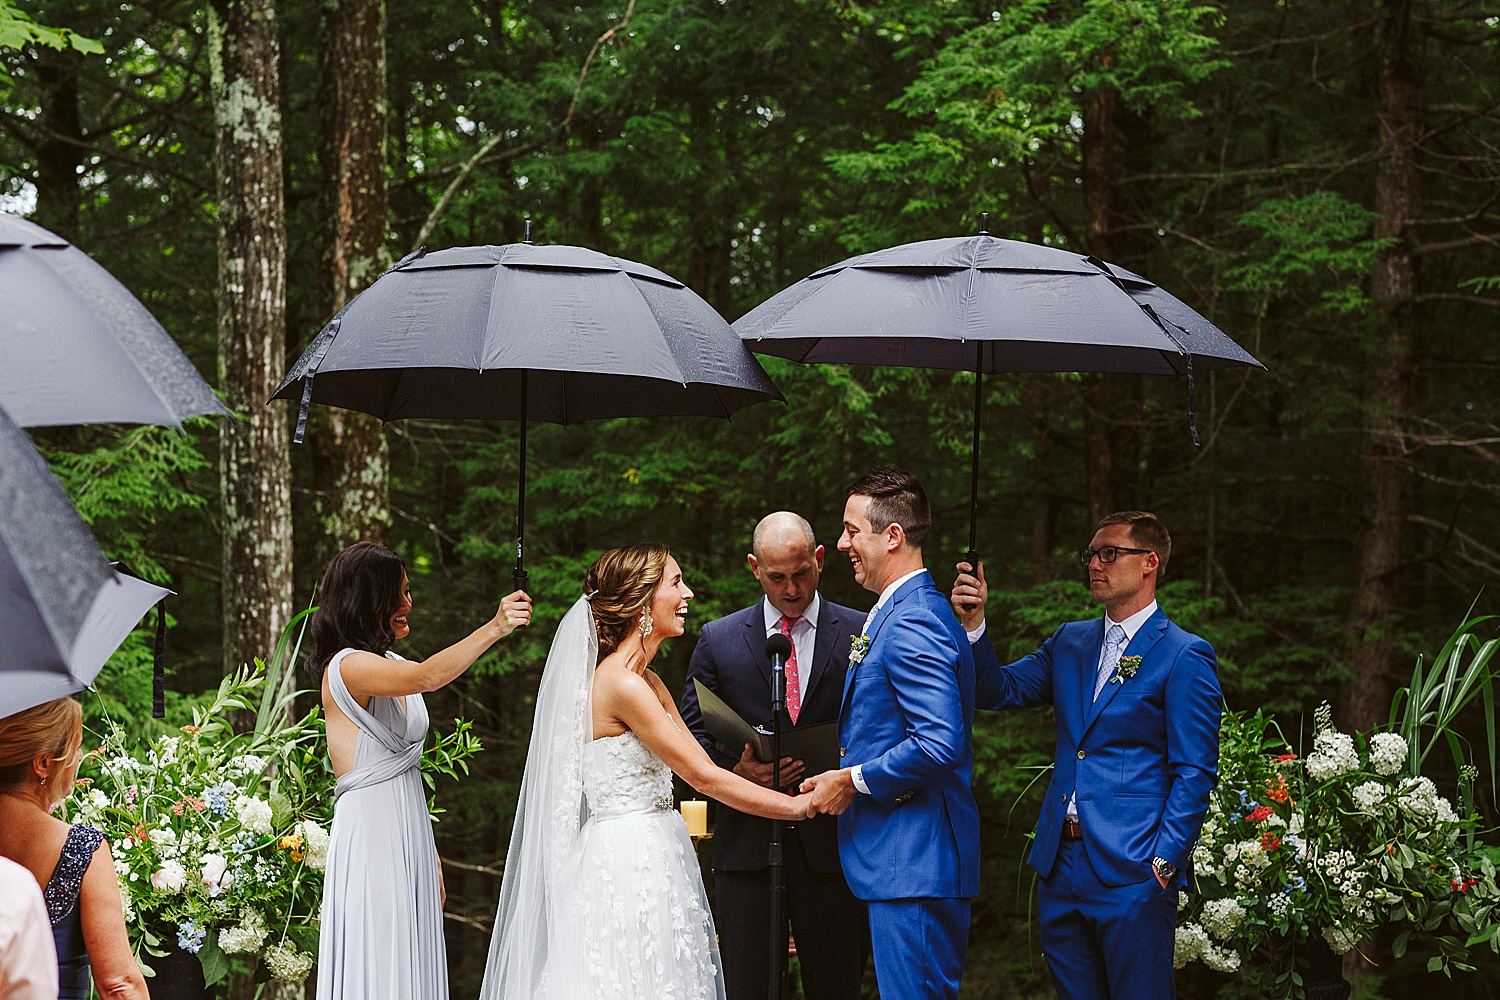 bridesmaid and groomsman hold umbrellas over bride and groom during wedding ceremony